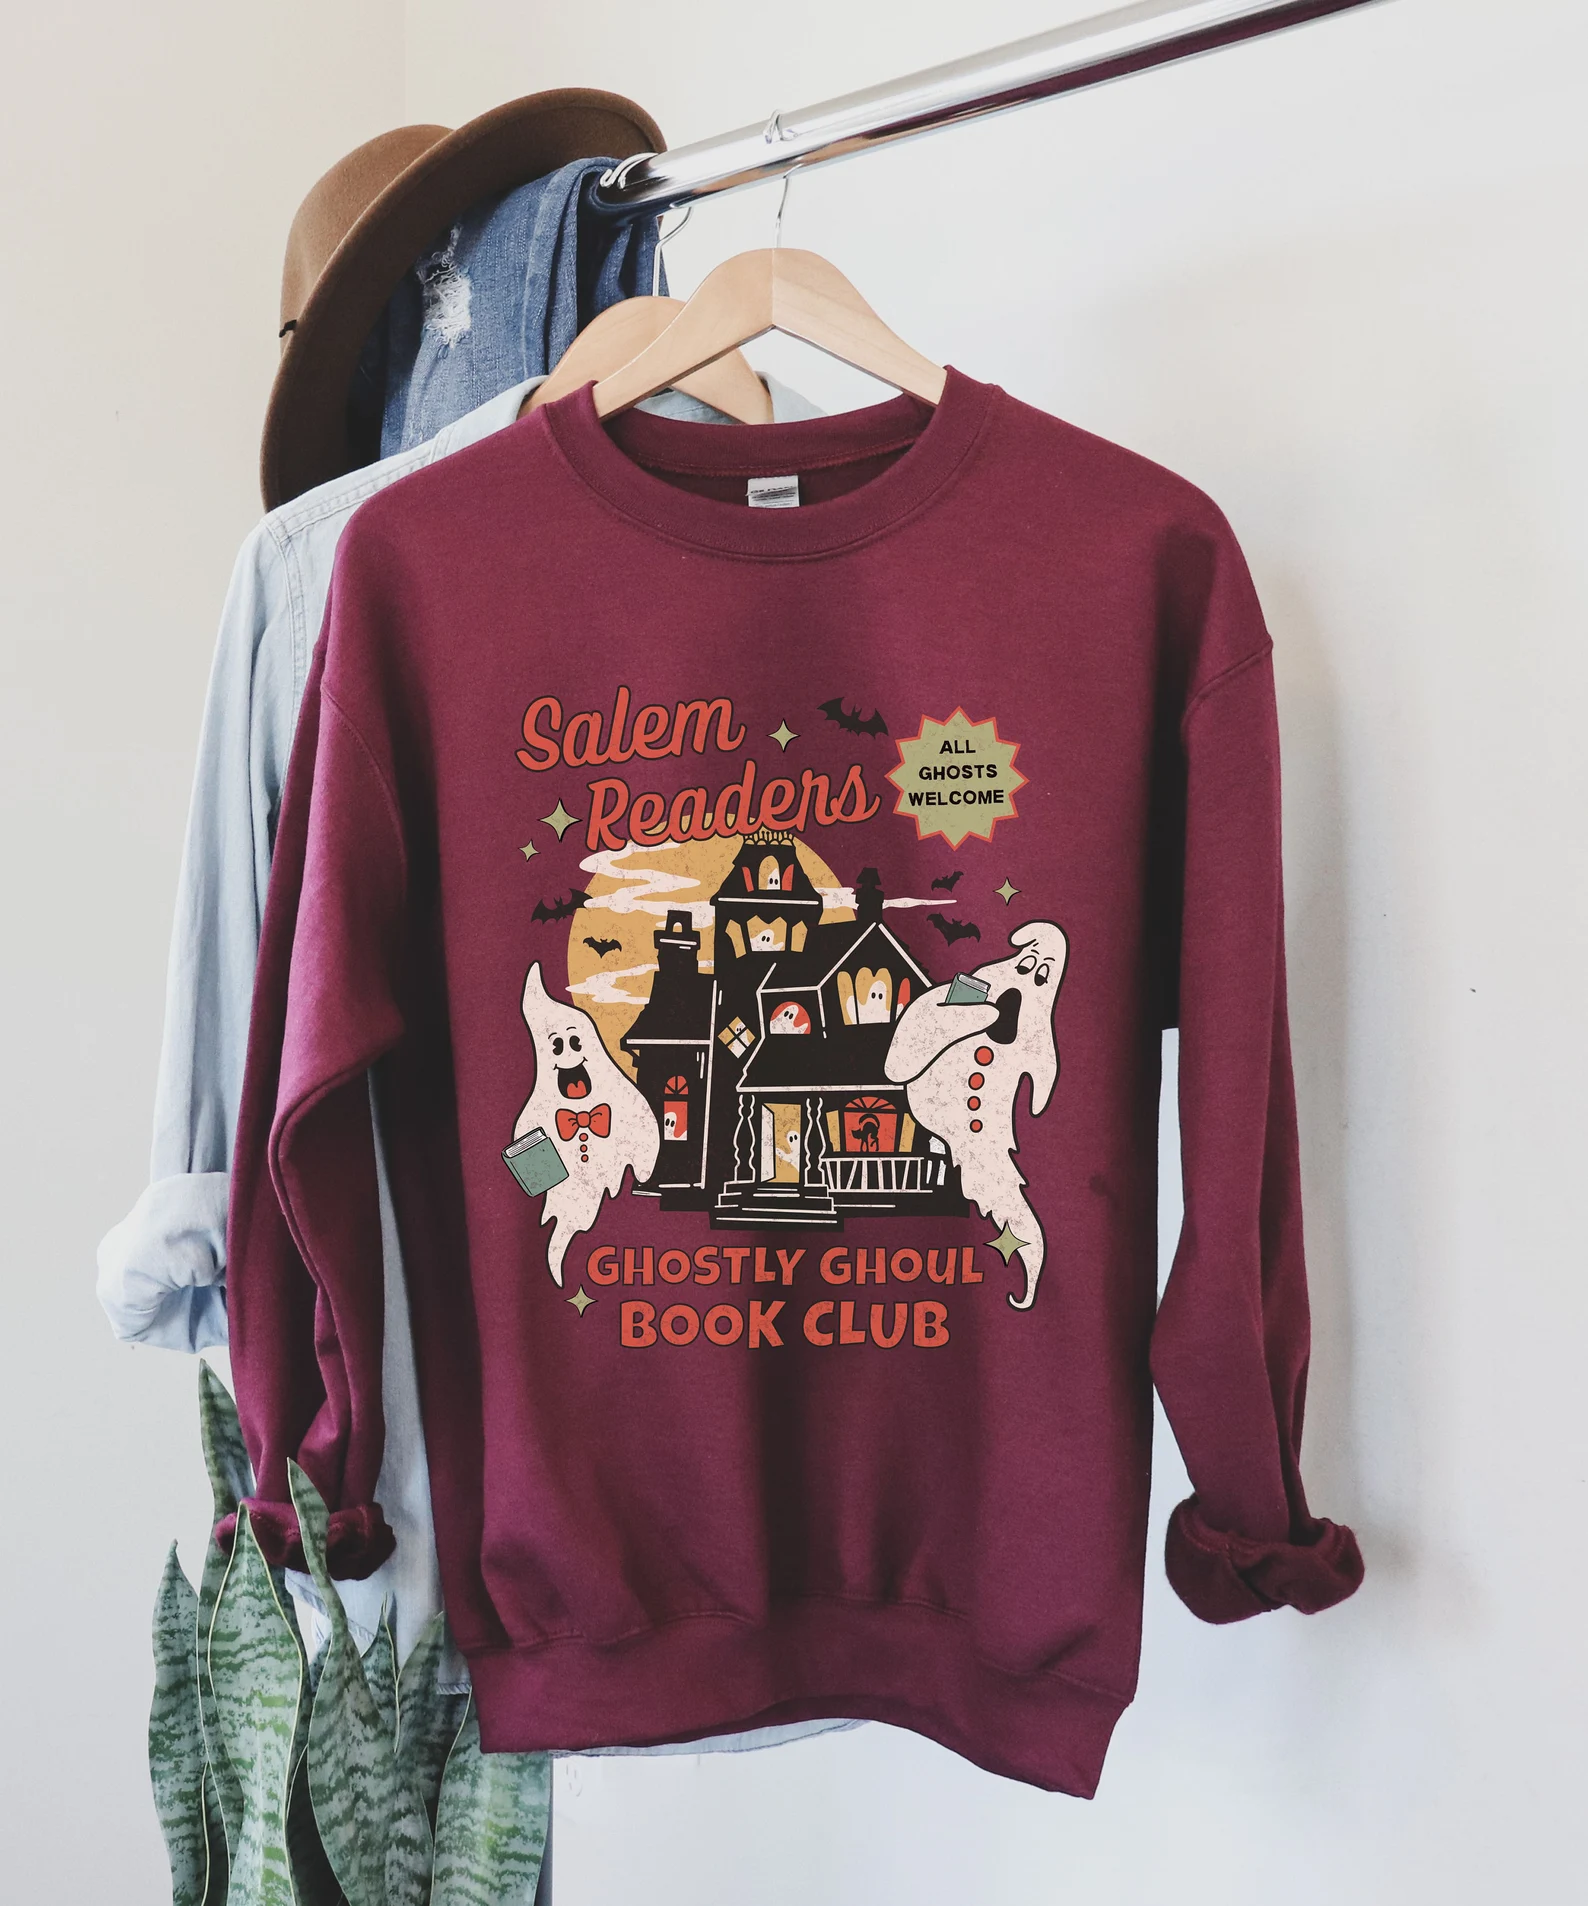 maroon sweatshirt with images of ghosts and a haunted house. it says "salem readers ghostly ghouls book club."